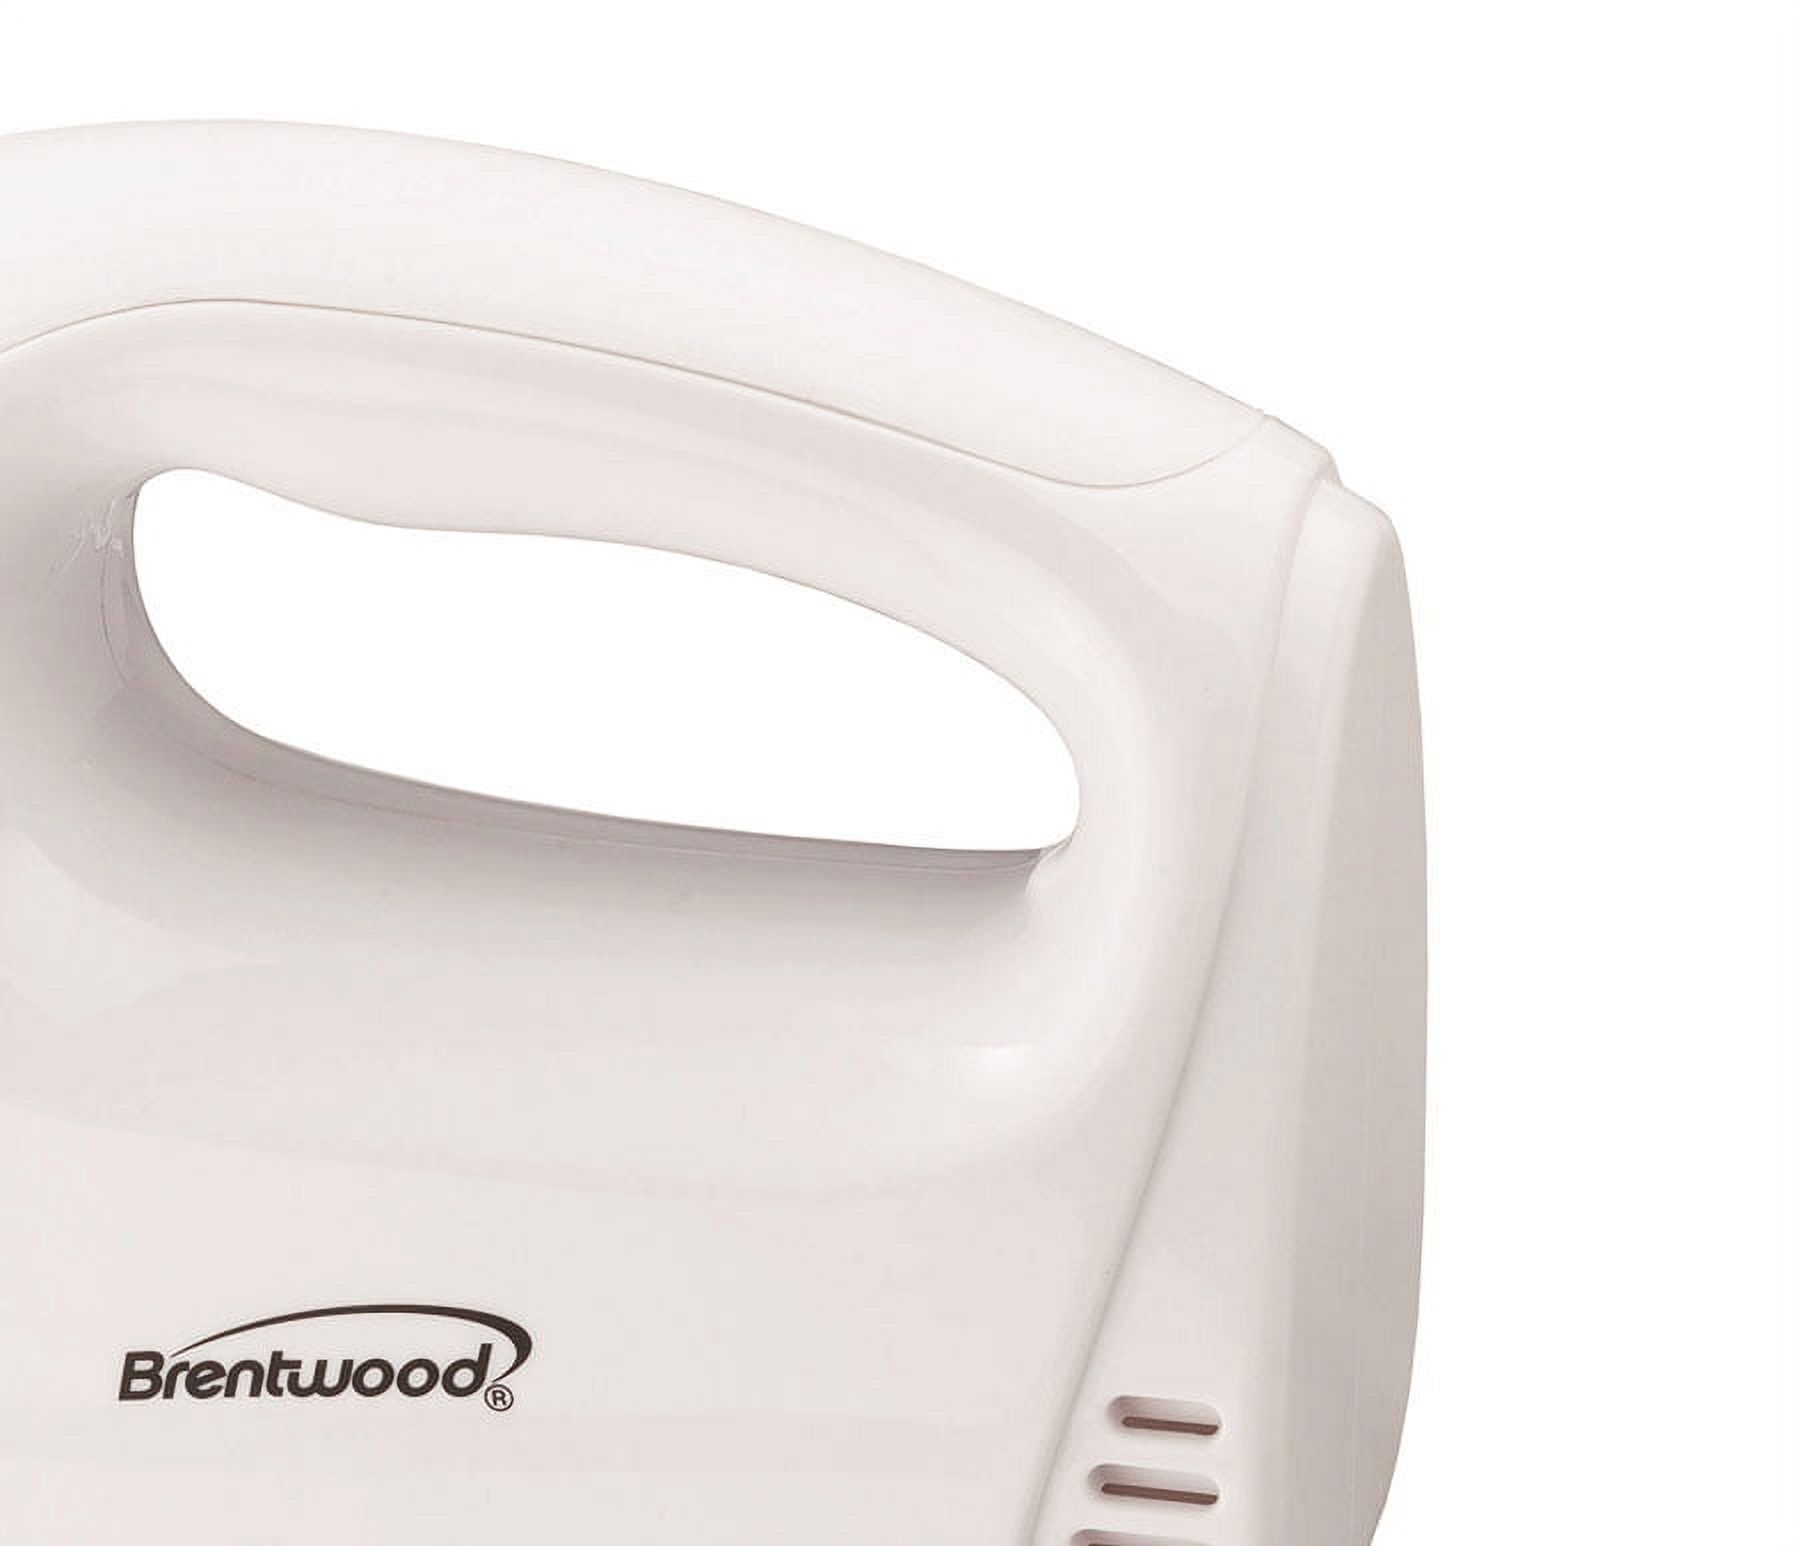 Brentwood HM-45 Lightweight 5-Speed Electric Hand Mixer, White - image 4 of 8